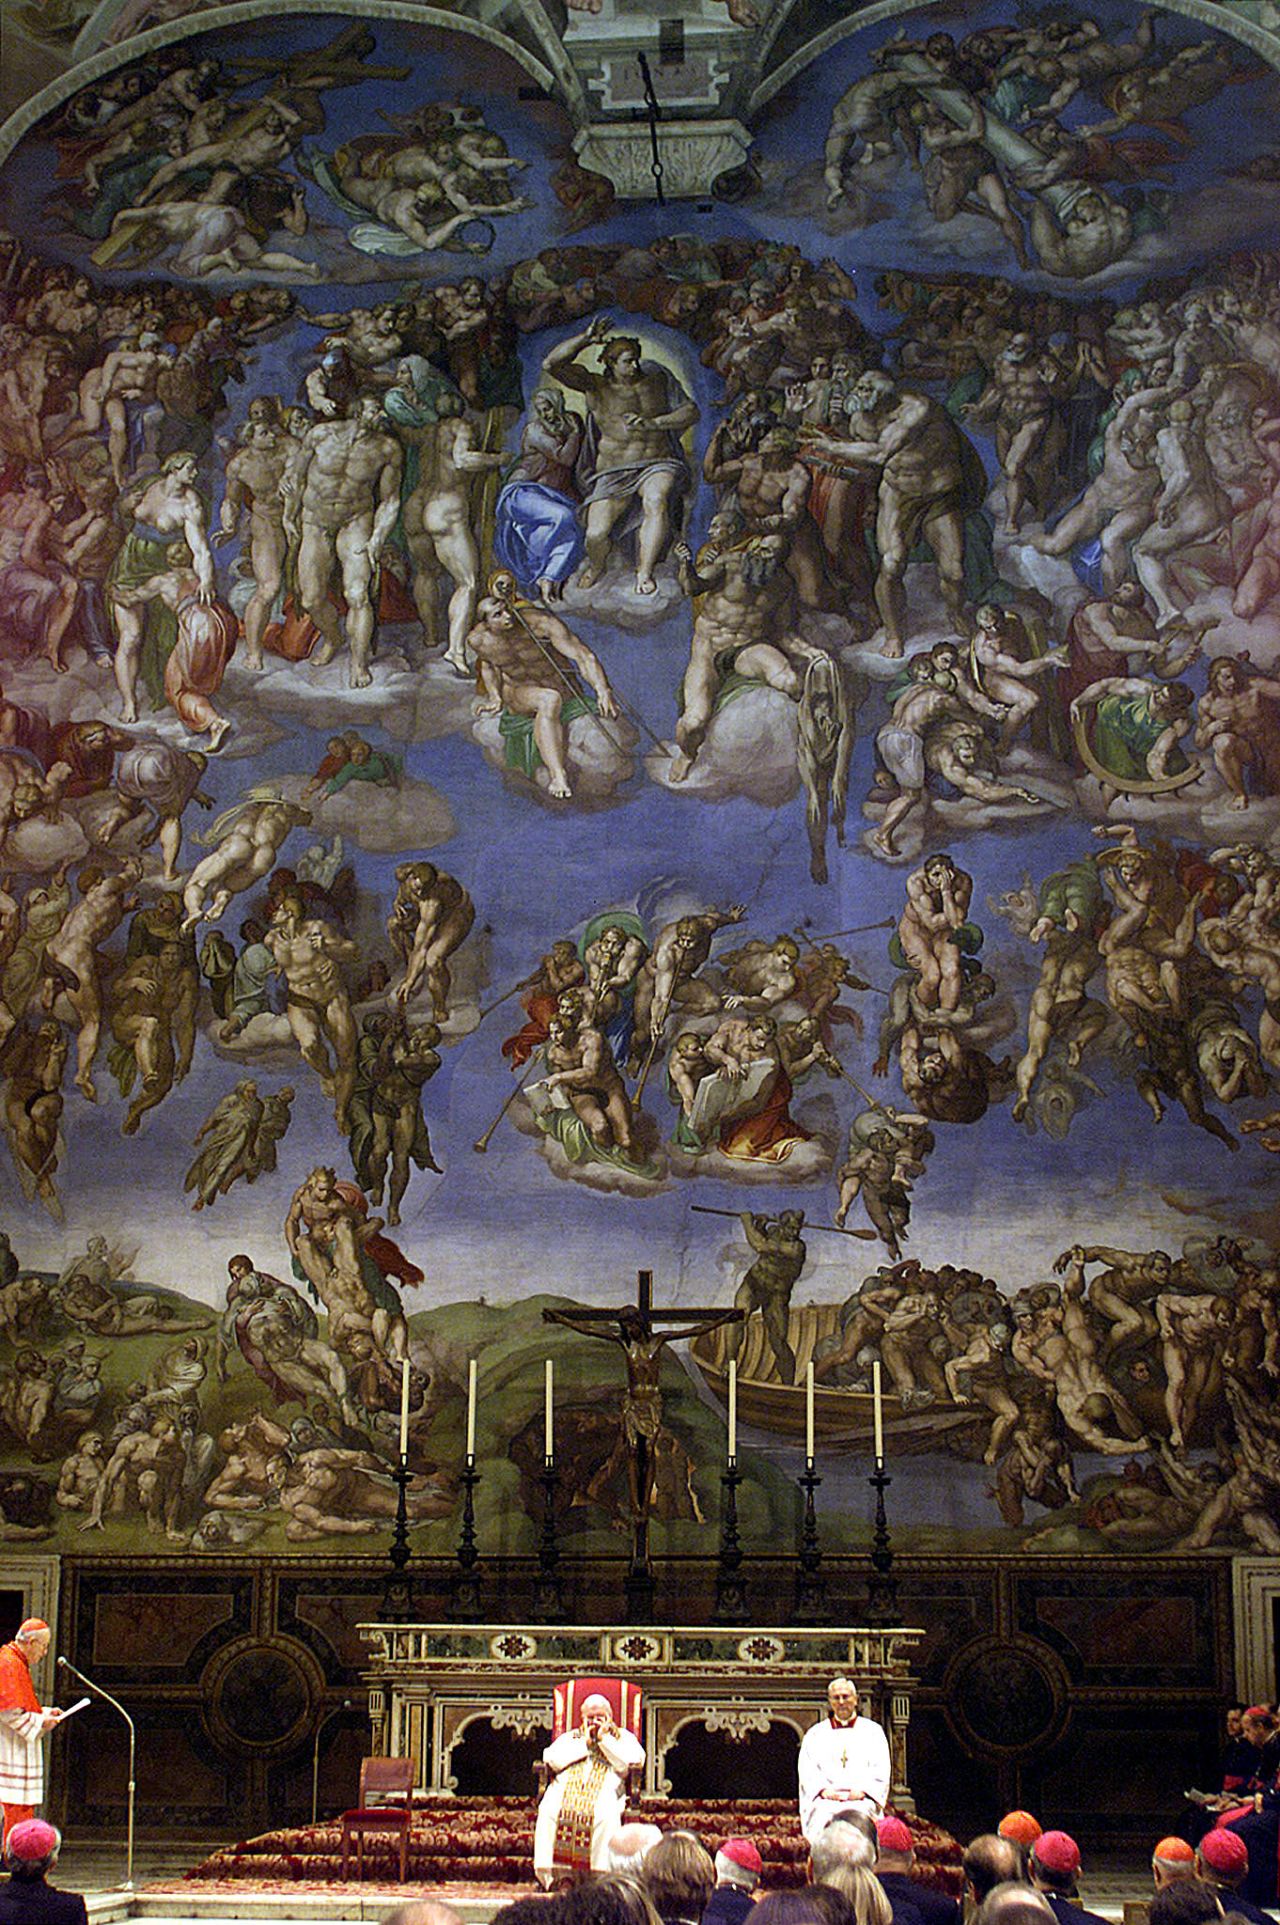 Michelangelo's "Last Judgement" at the Sistine Chapel in the Vatican is believed by some to contain coded messages preaching religious tolerance.